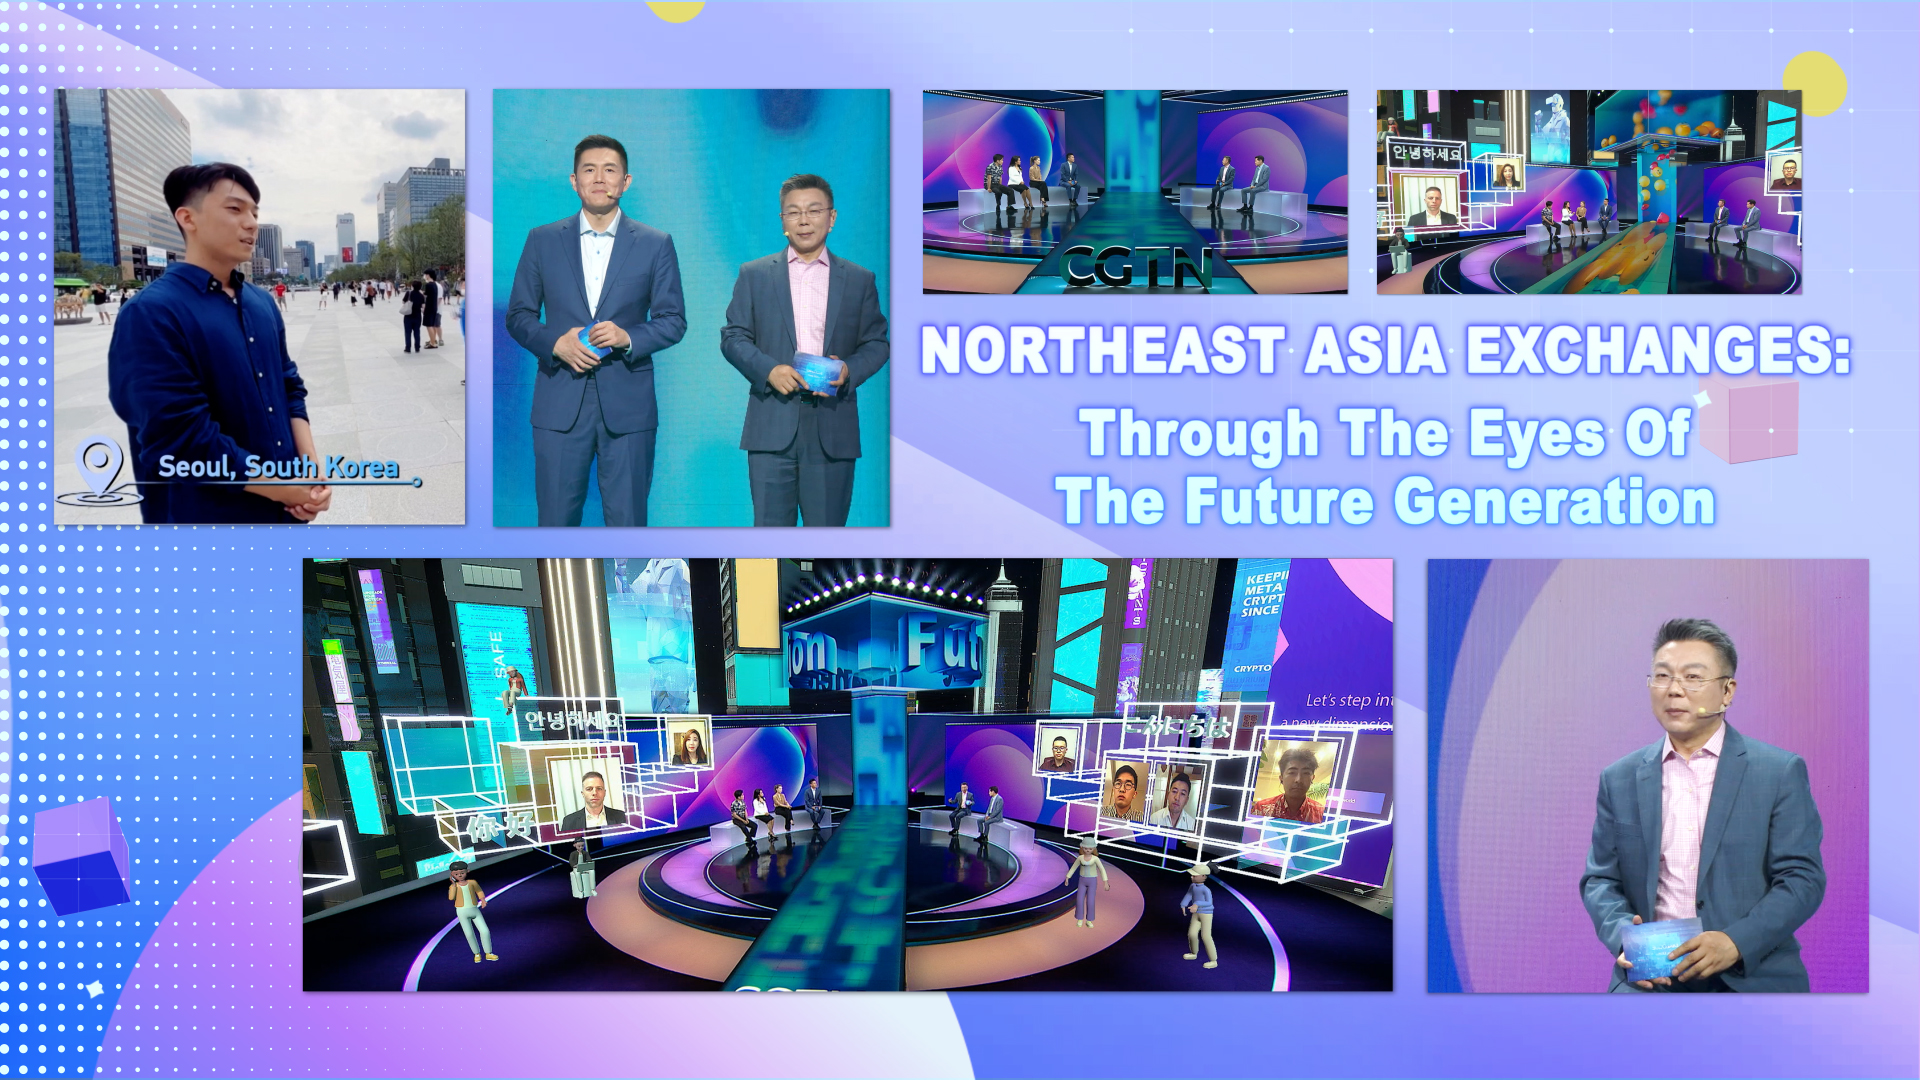 Watch: Northeast Asia exchanges through the eyes of the future generation